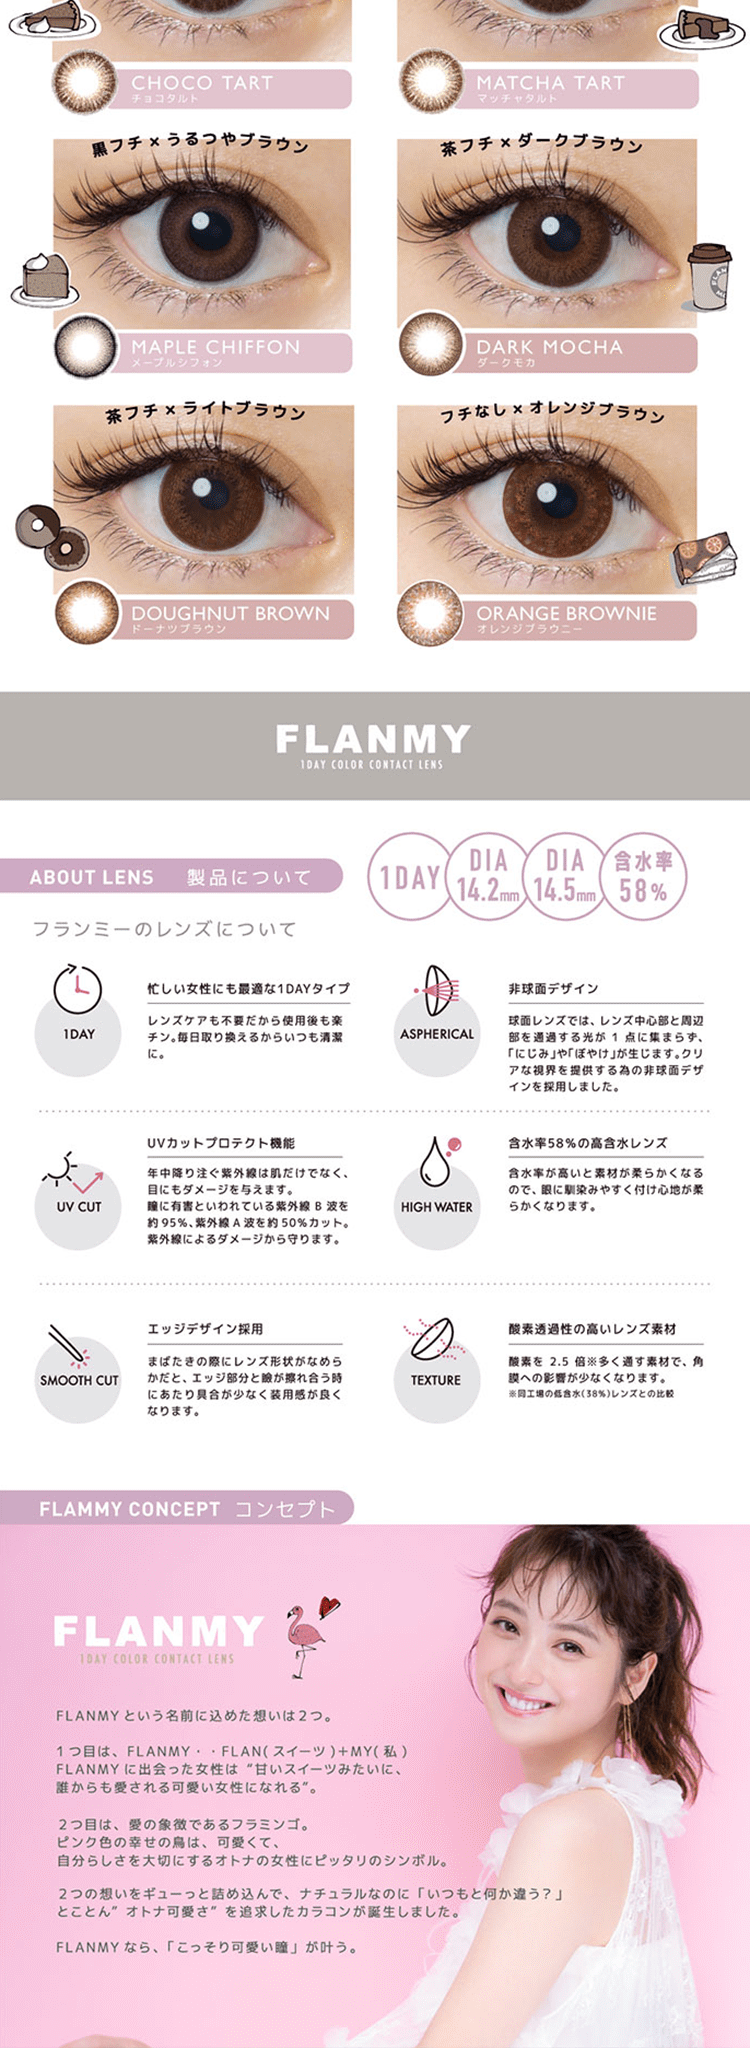 FLANMY_pc_2